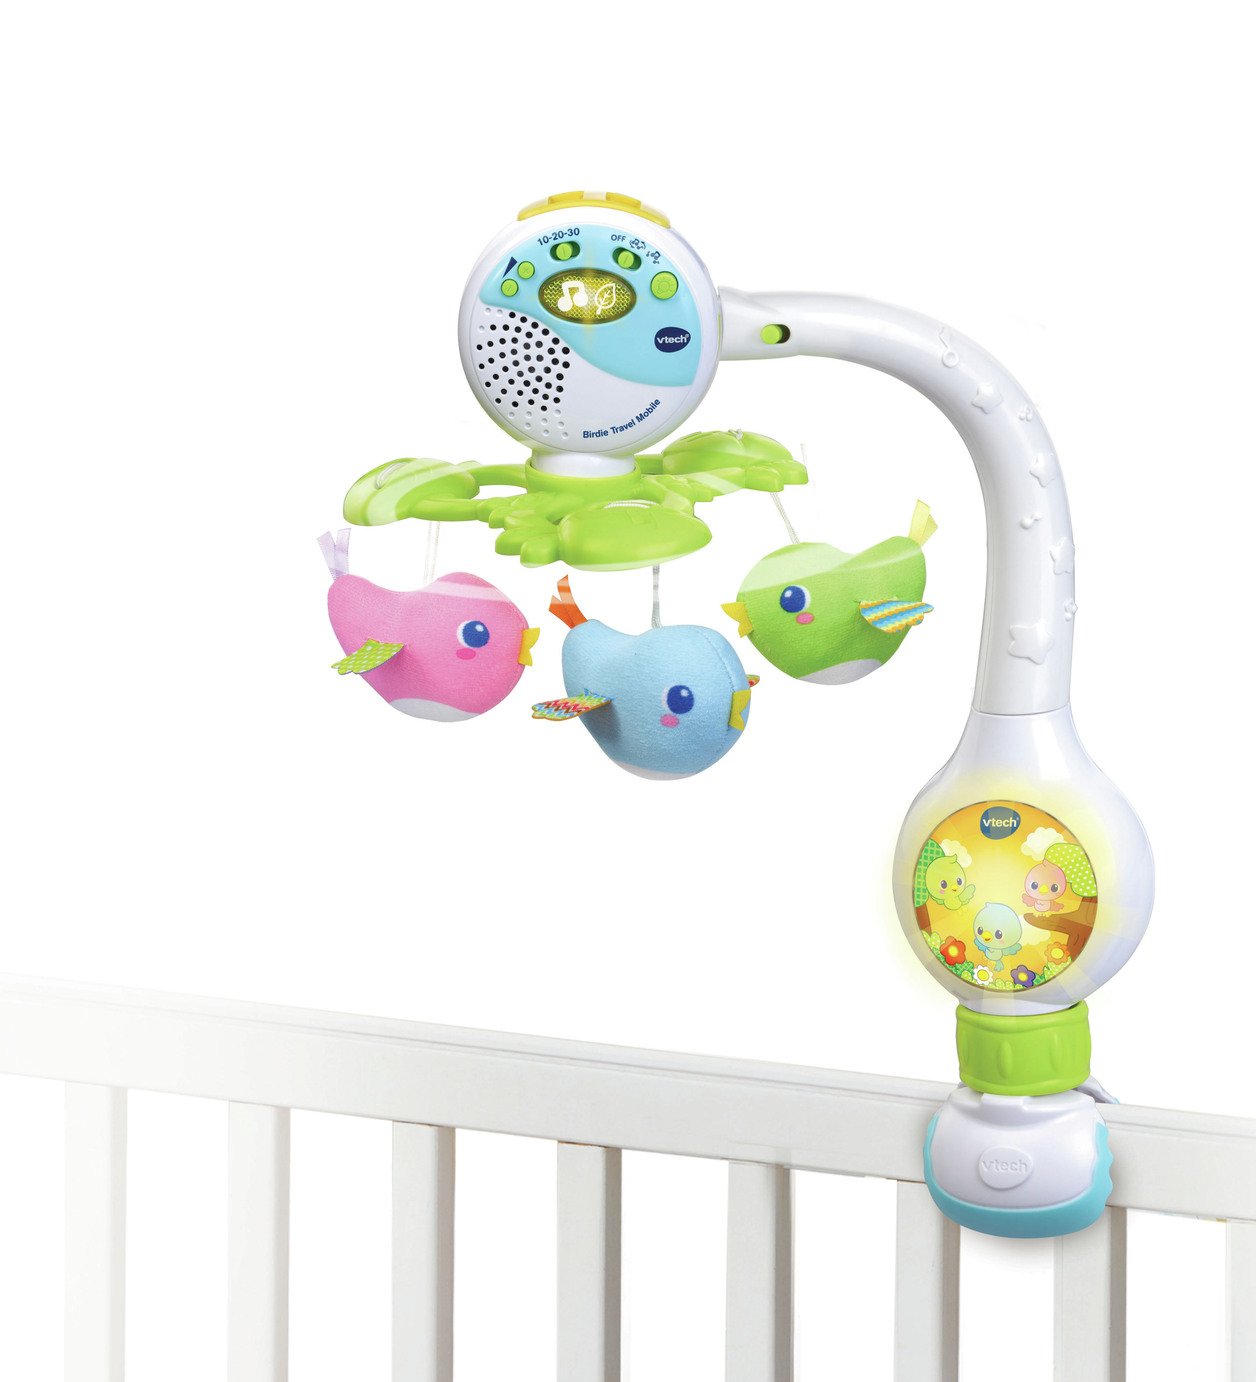 VTech Birdie Travel Mobile Review